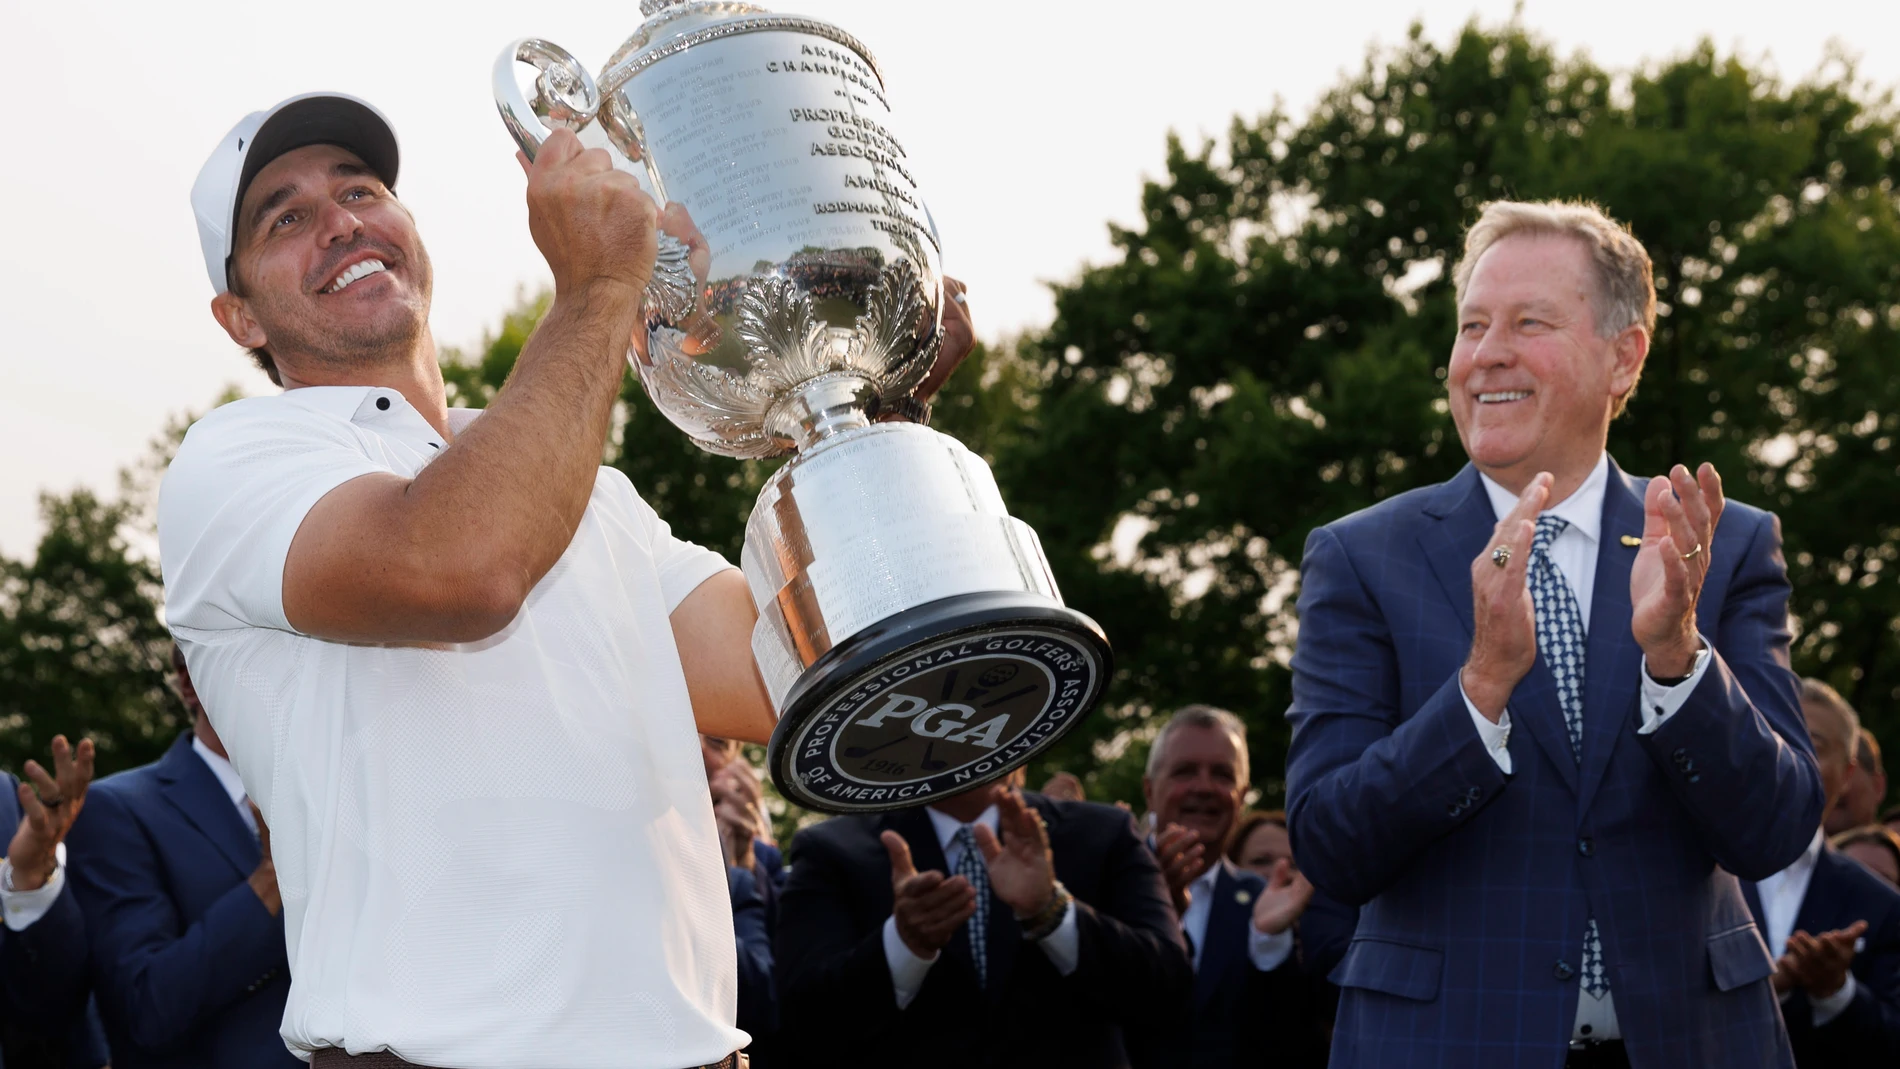 Rochester (United States), 21/05/2023.- Brooks Koepka of the United States holds the Wanamaker Trophy after winning the 2023 PGA Championship golf tournament at the Oak Hill Country Club in Rochester, New York, USA, 21 May 2023. (Estados Unidos, Nueva York) EFE/EPA/CJ GUNTHER